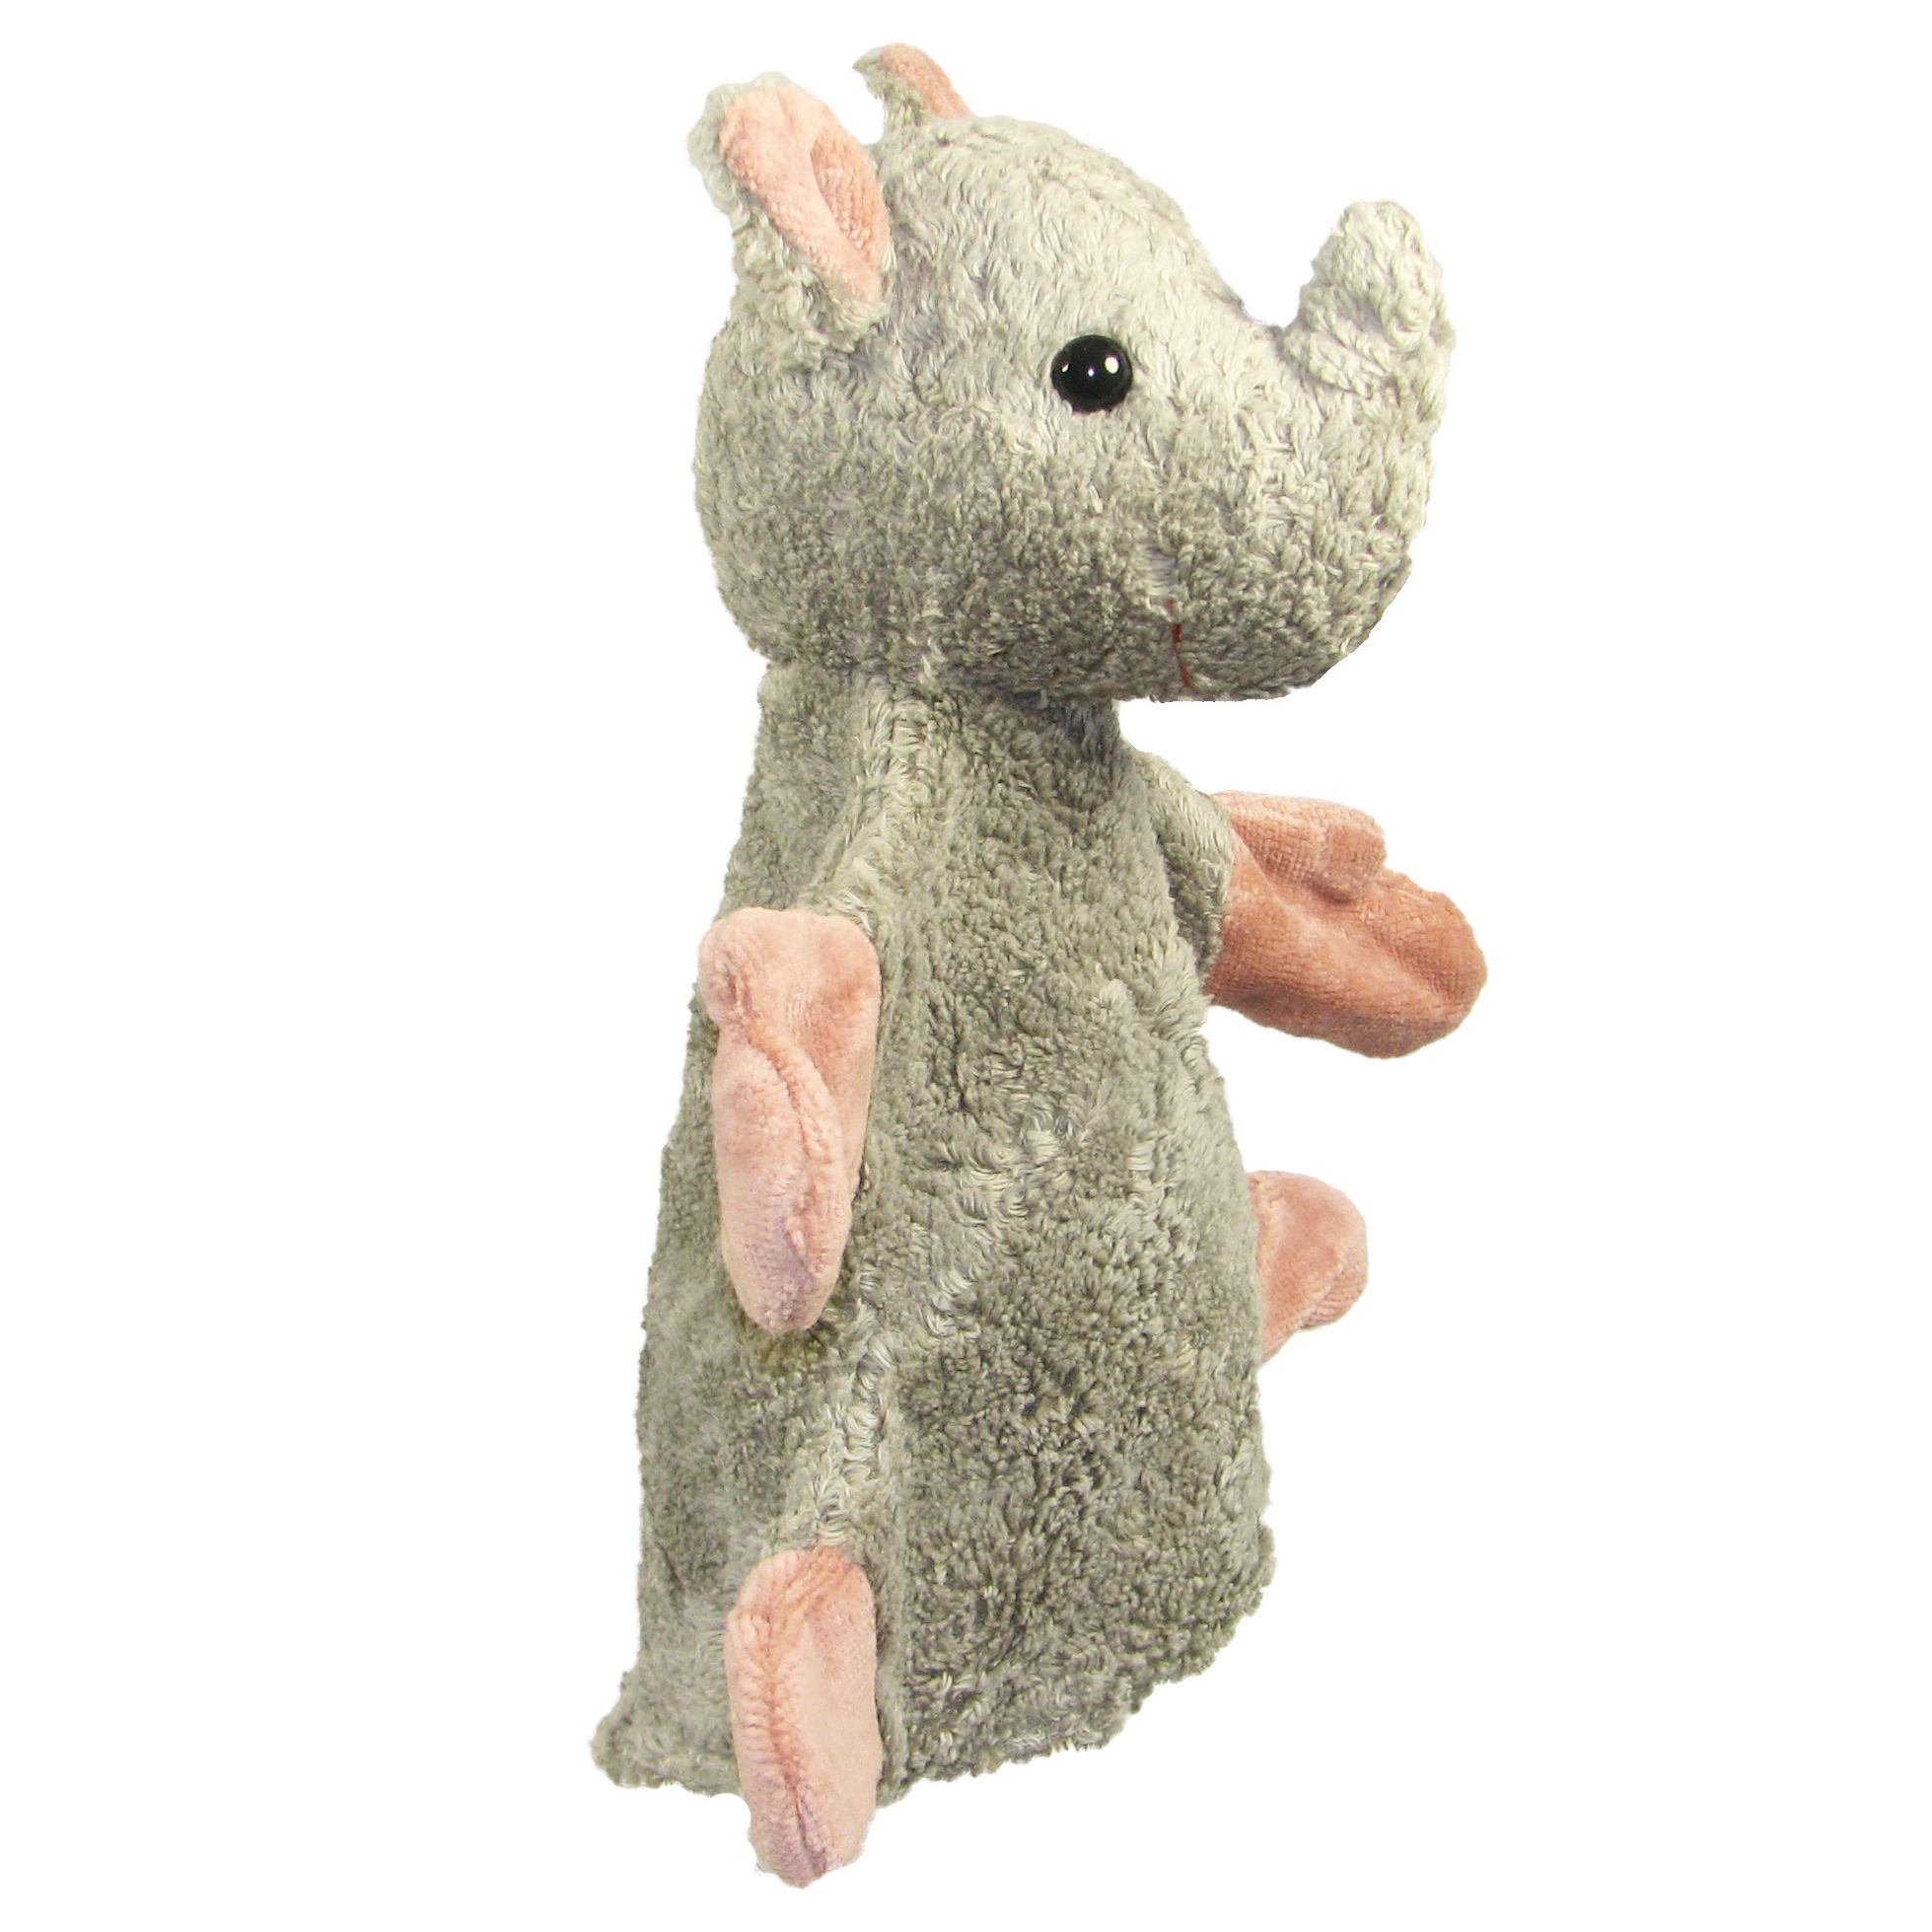 Hand puppet rhino - made of natural material - by Kallisto